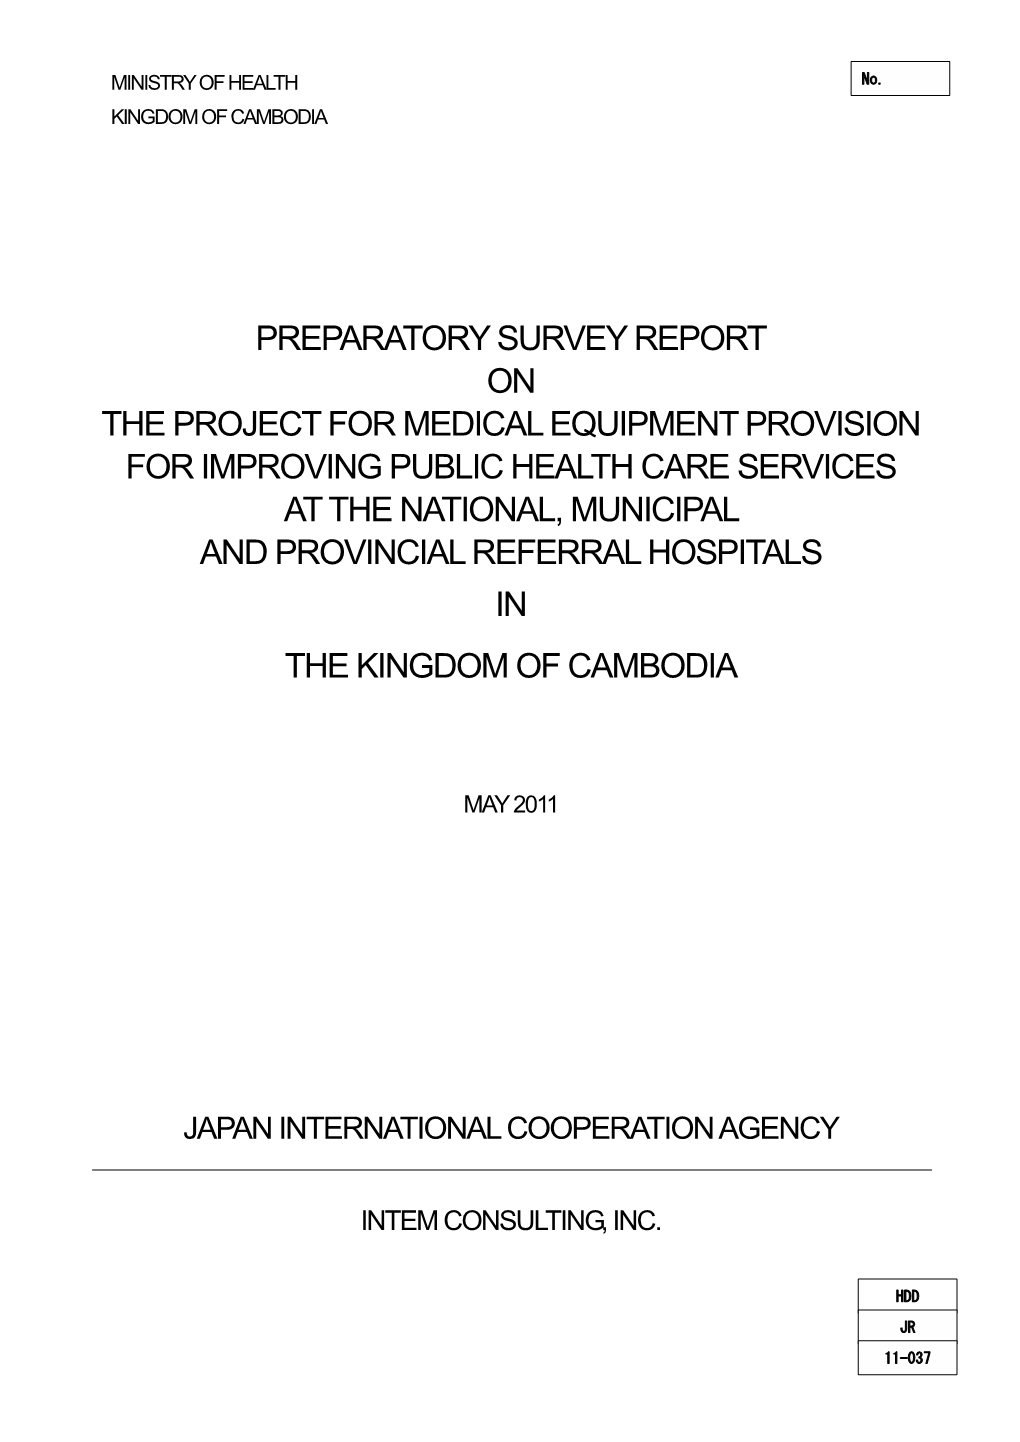 Preparatory Survey Report on the Project for Medical